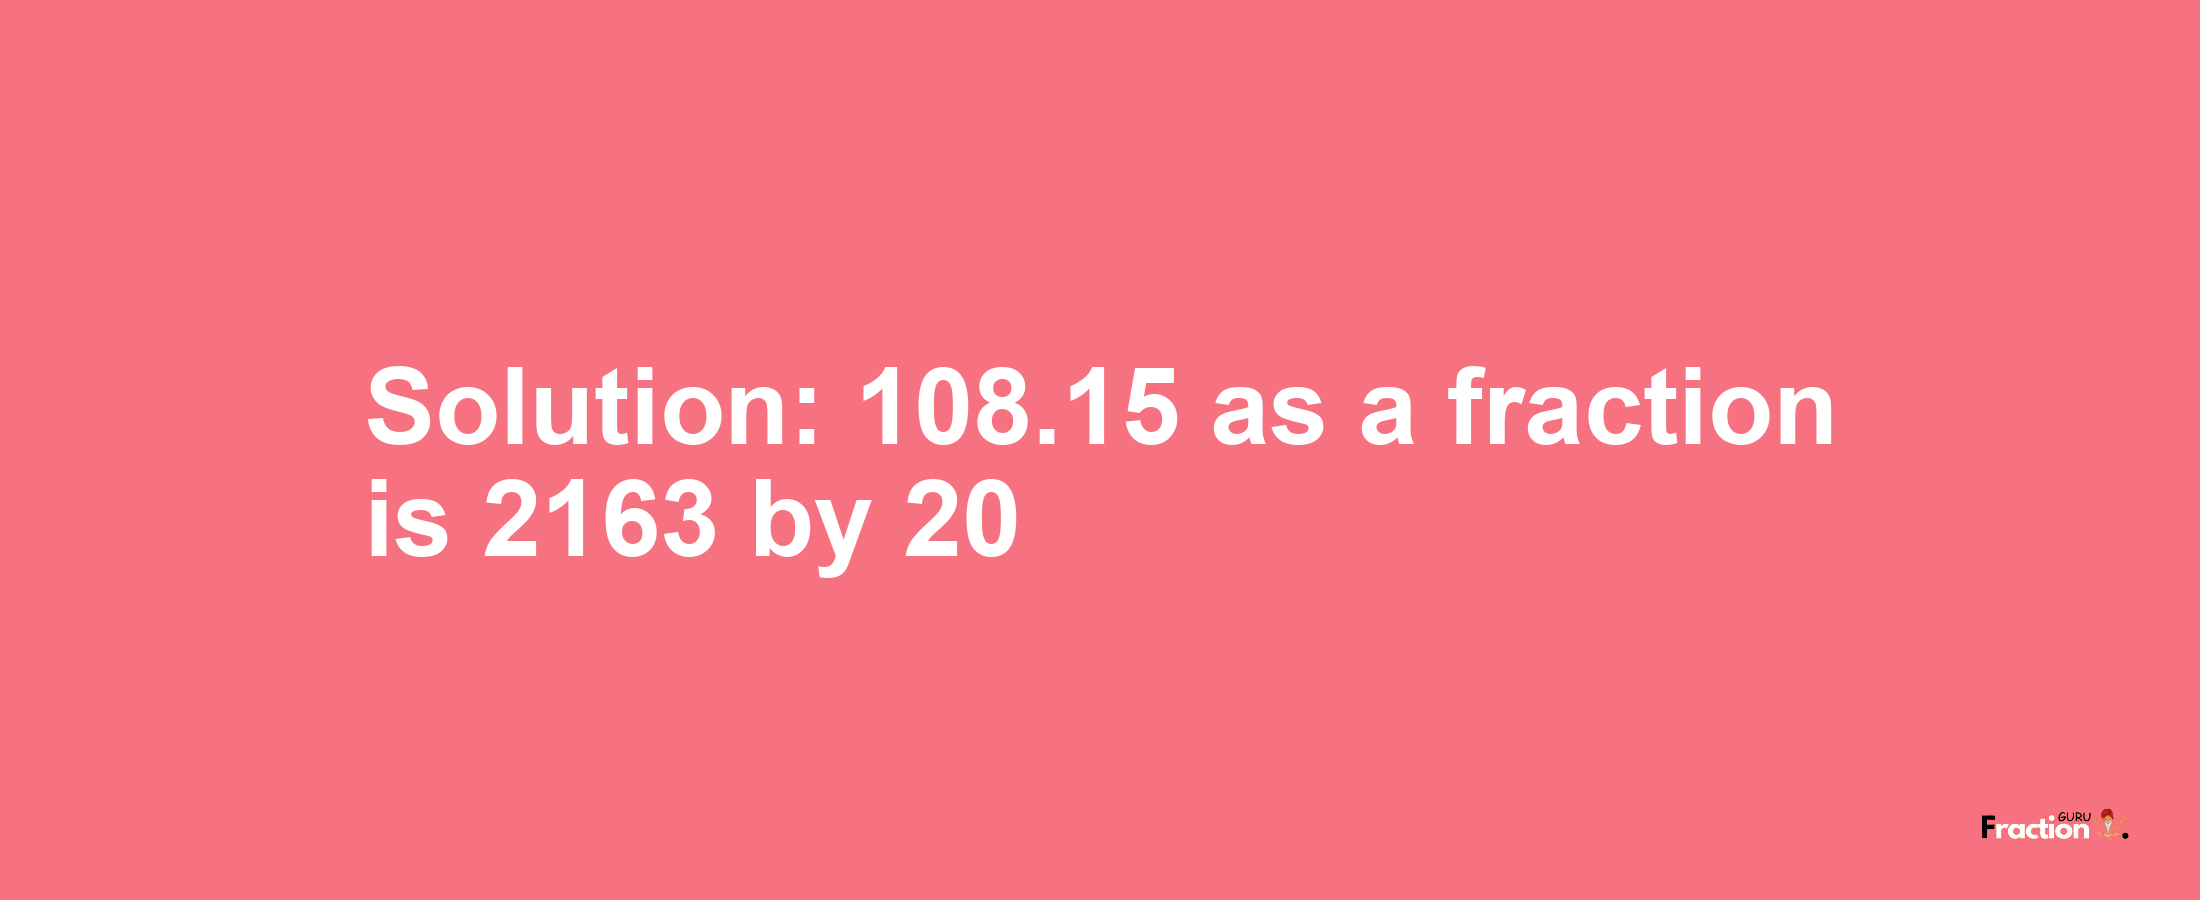 Solution:108.15 as a fraction is 2163/20